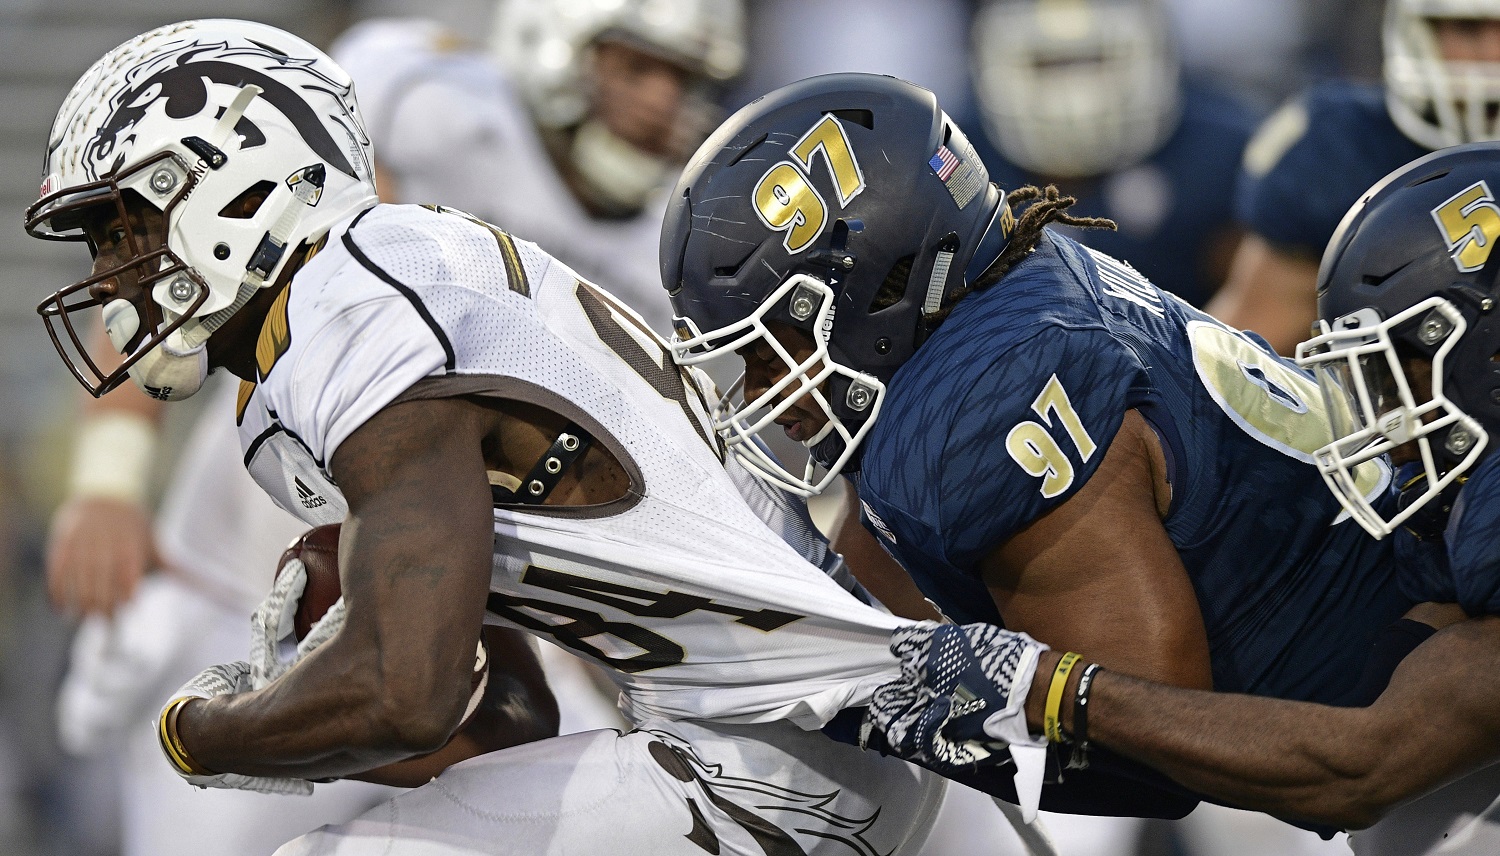 Western Michigan receiver Corey Davis, left, is grabbed by Akron defensive linemen Brennan Williams (97) and linebacker Ulysses Gilbert III in the fourth quarter of an NCAA college football game on Saturday, Oct. 15, 2016, in Akron, Ohio. (AP Photo/David Dermer)